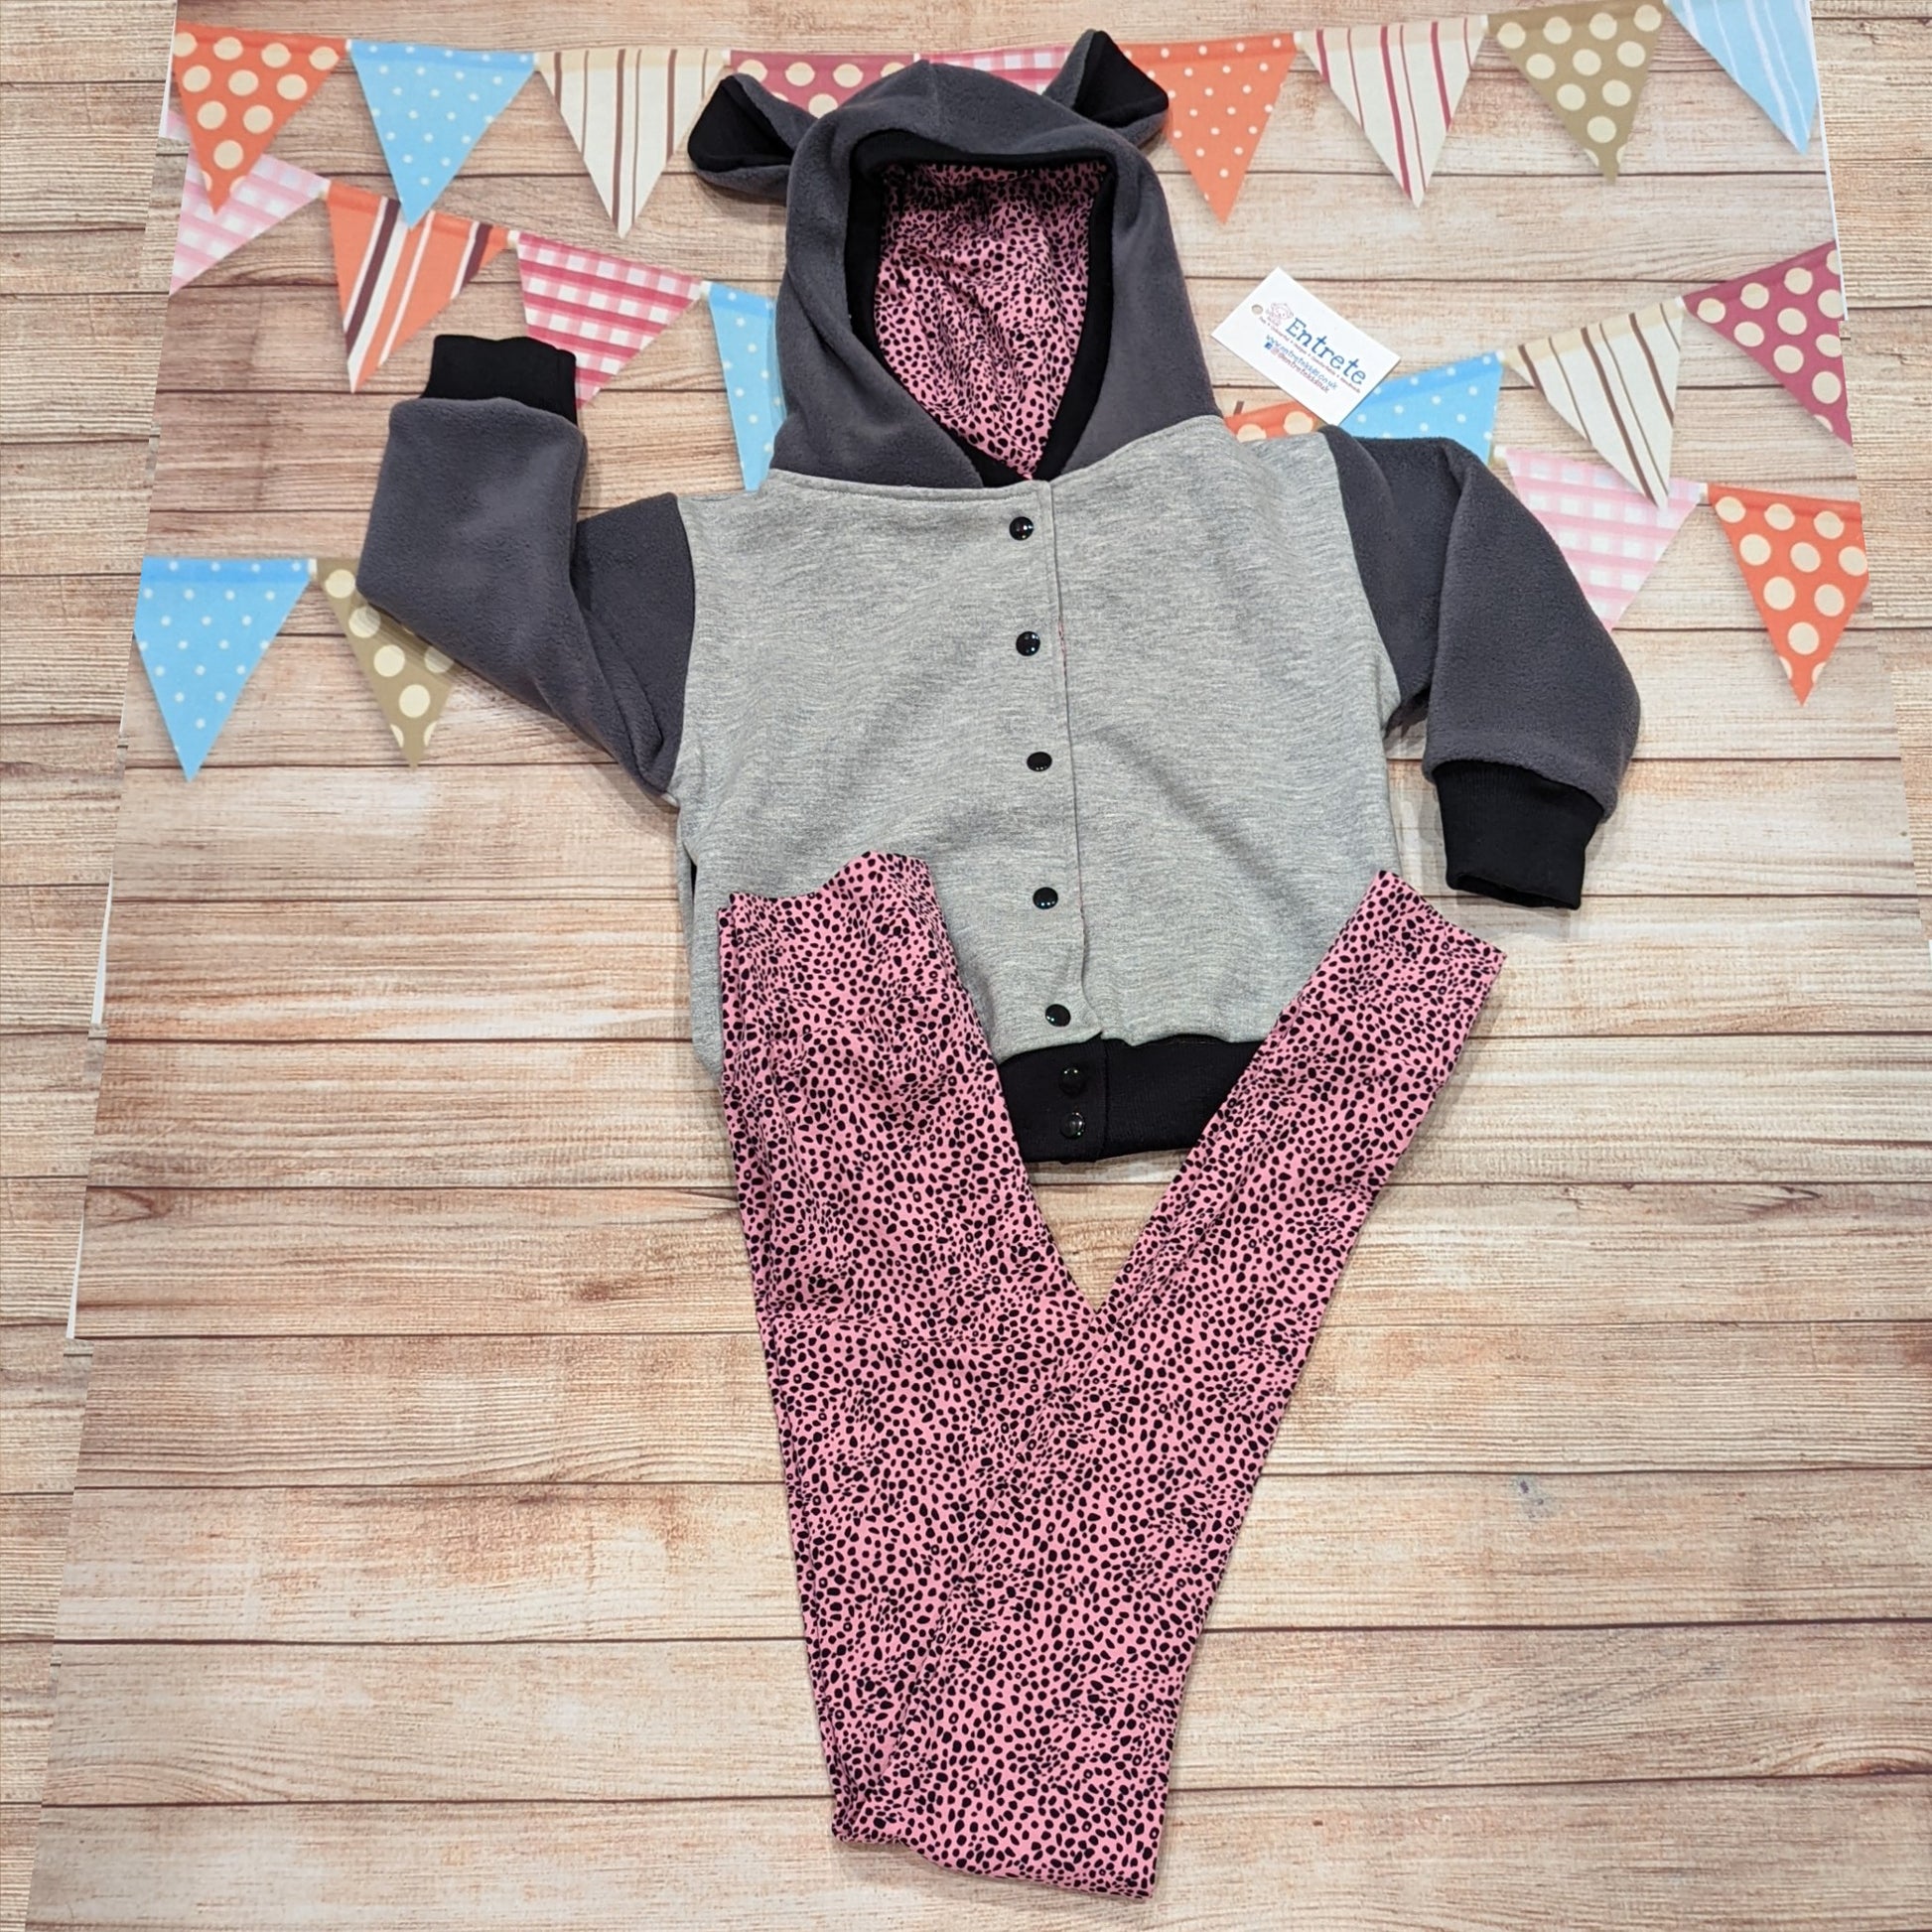 The adorable and fun reversible cat hoodie, shown as an outfit with matching pink cheetah print leggings.